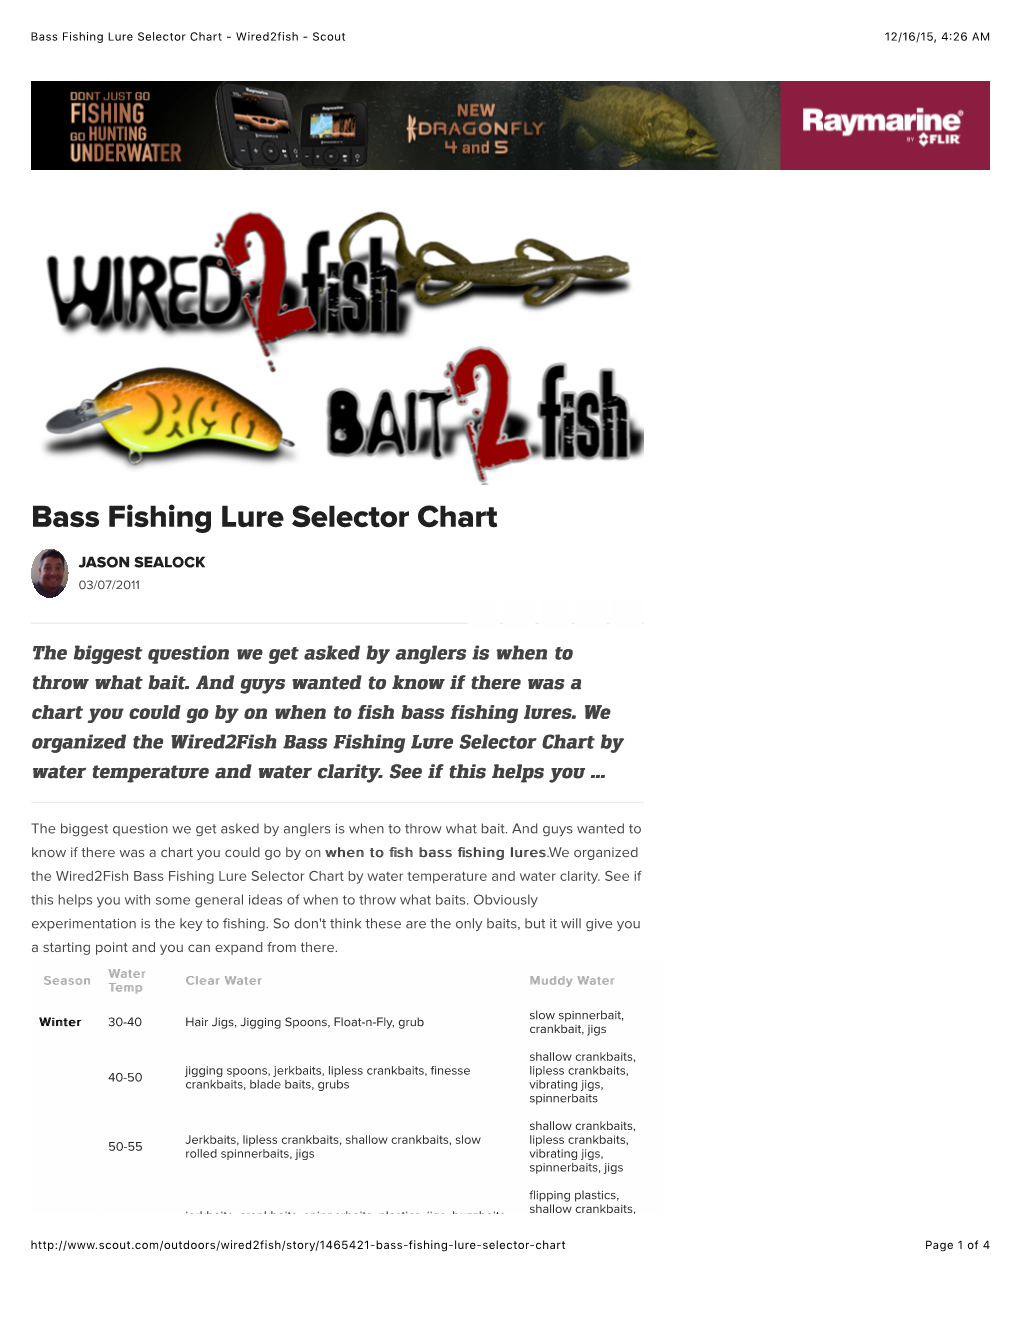 Bass Fishing Lure Selector Chart - Wired2fish - Scout 12/16/15, 4:26 AM